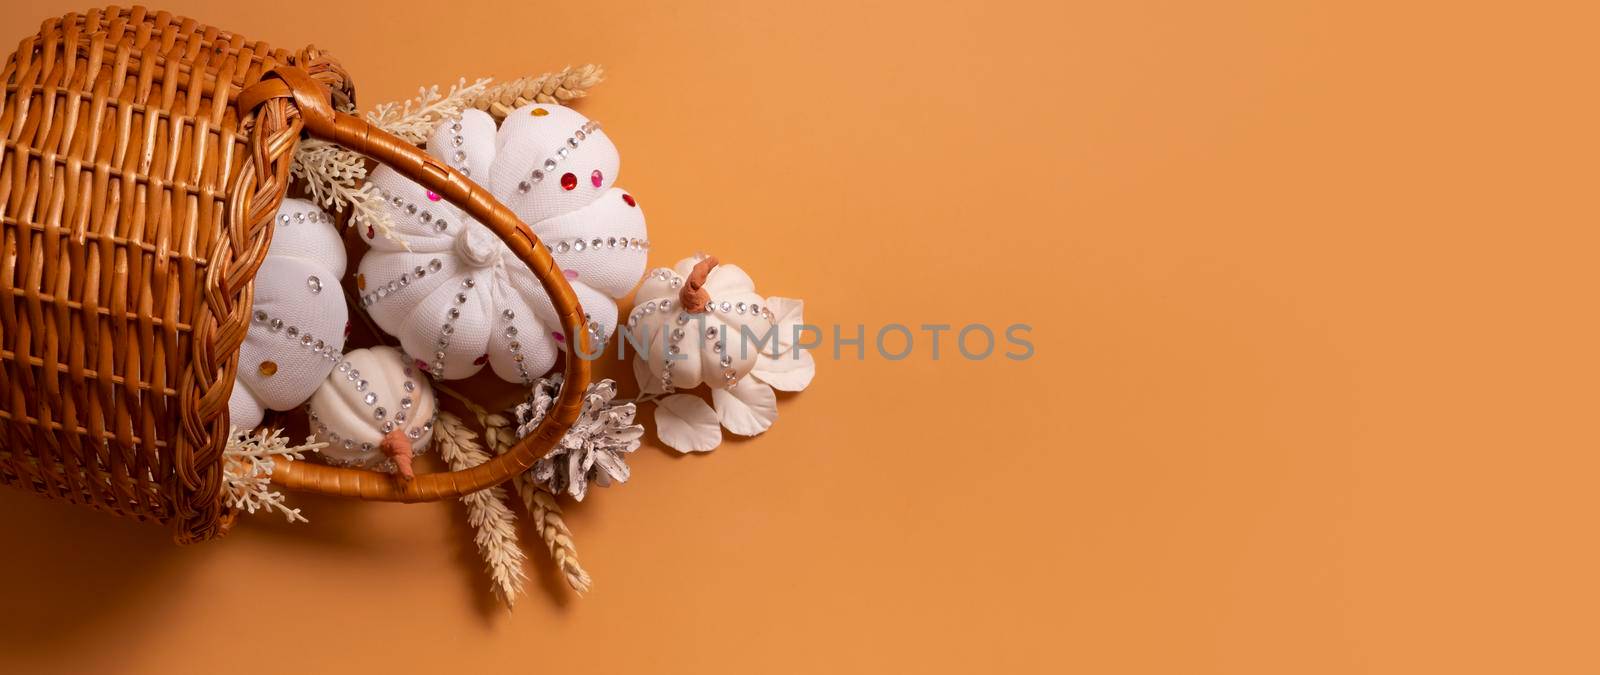 Banner with white decorative pumpkins with shiny stones and pine cones in basket on colored background with copy space.